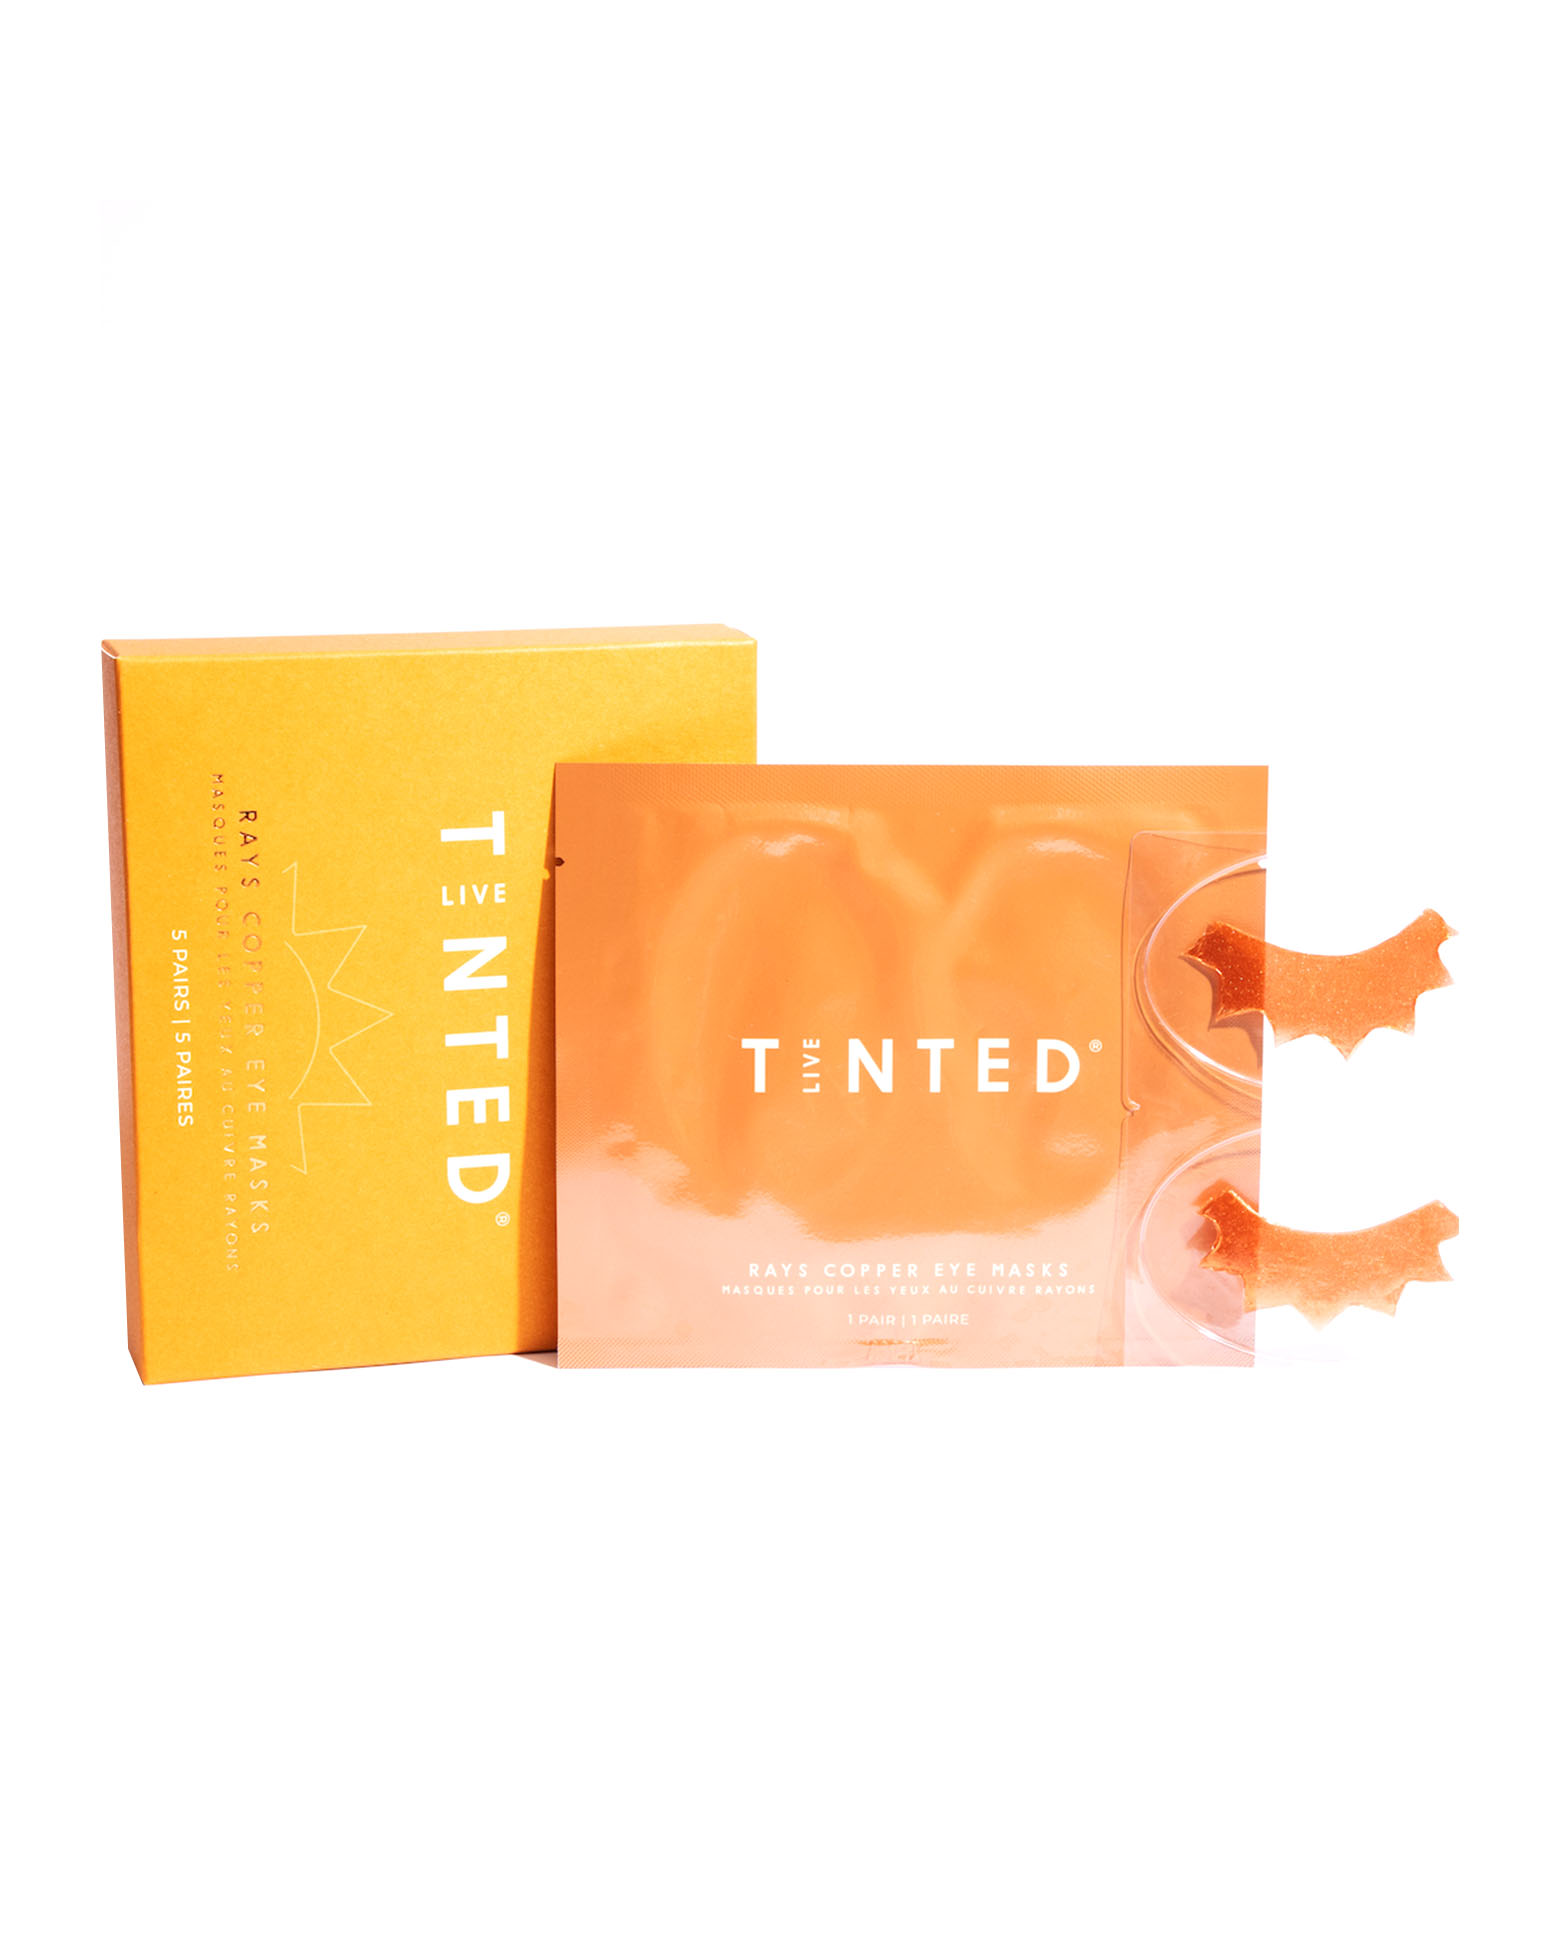 Live Tinted - Rays Copper Eye Masks